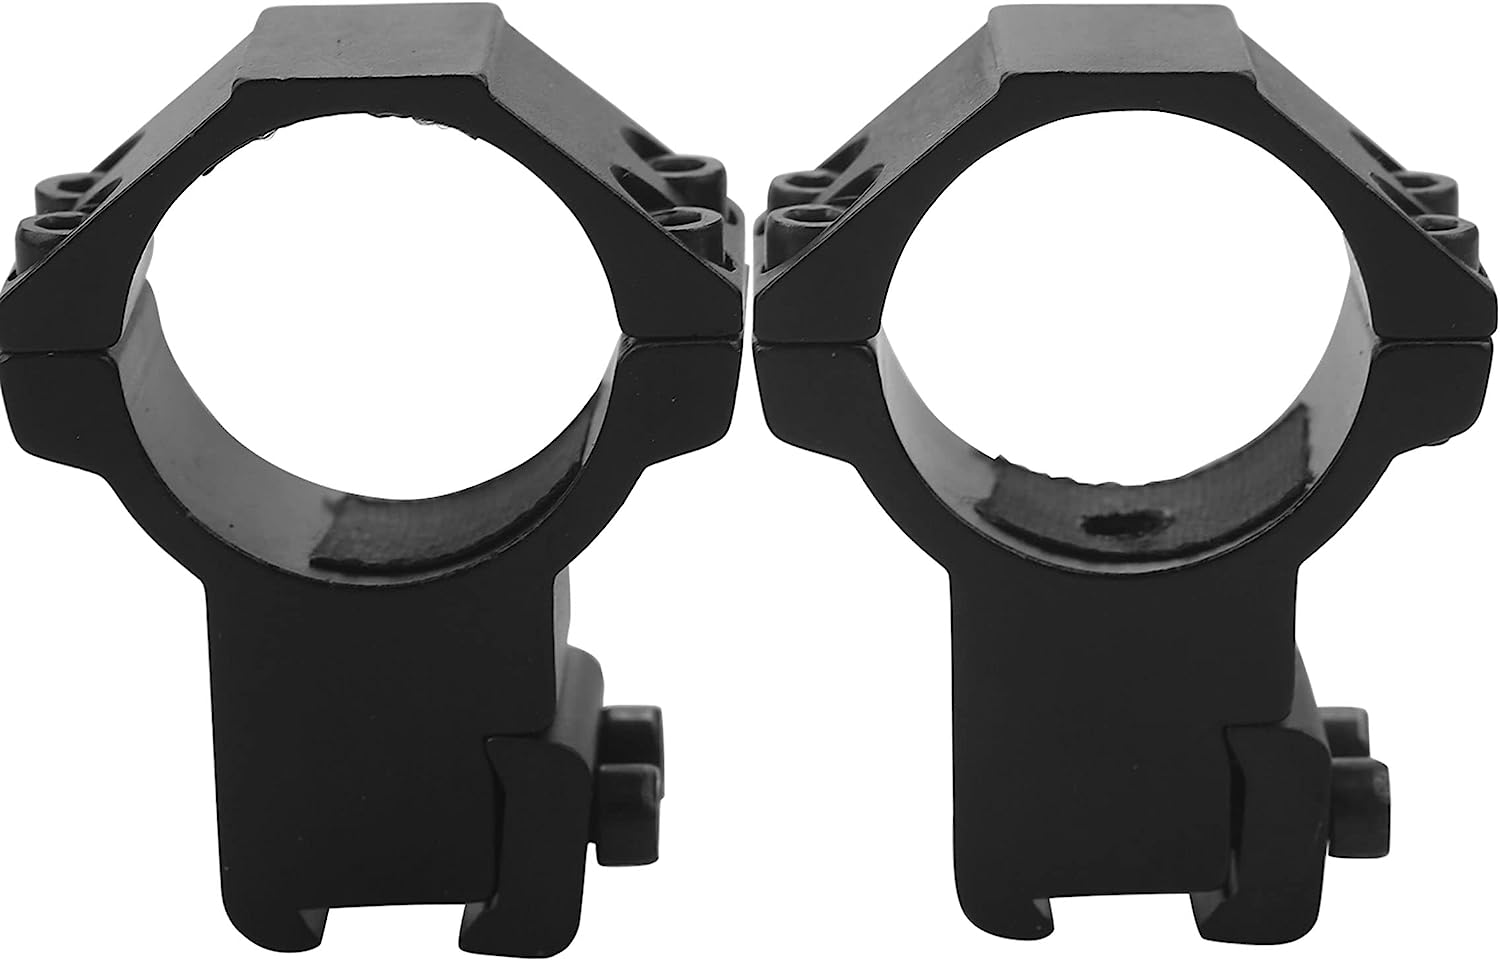 DISCOVERY MOUNT RINGS, 30MM, HIGH, 9-11MM DOVETAIL